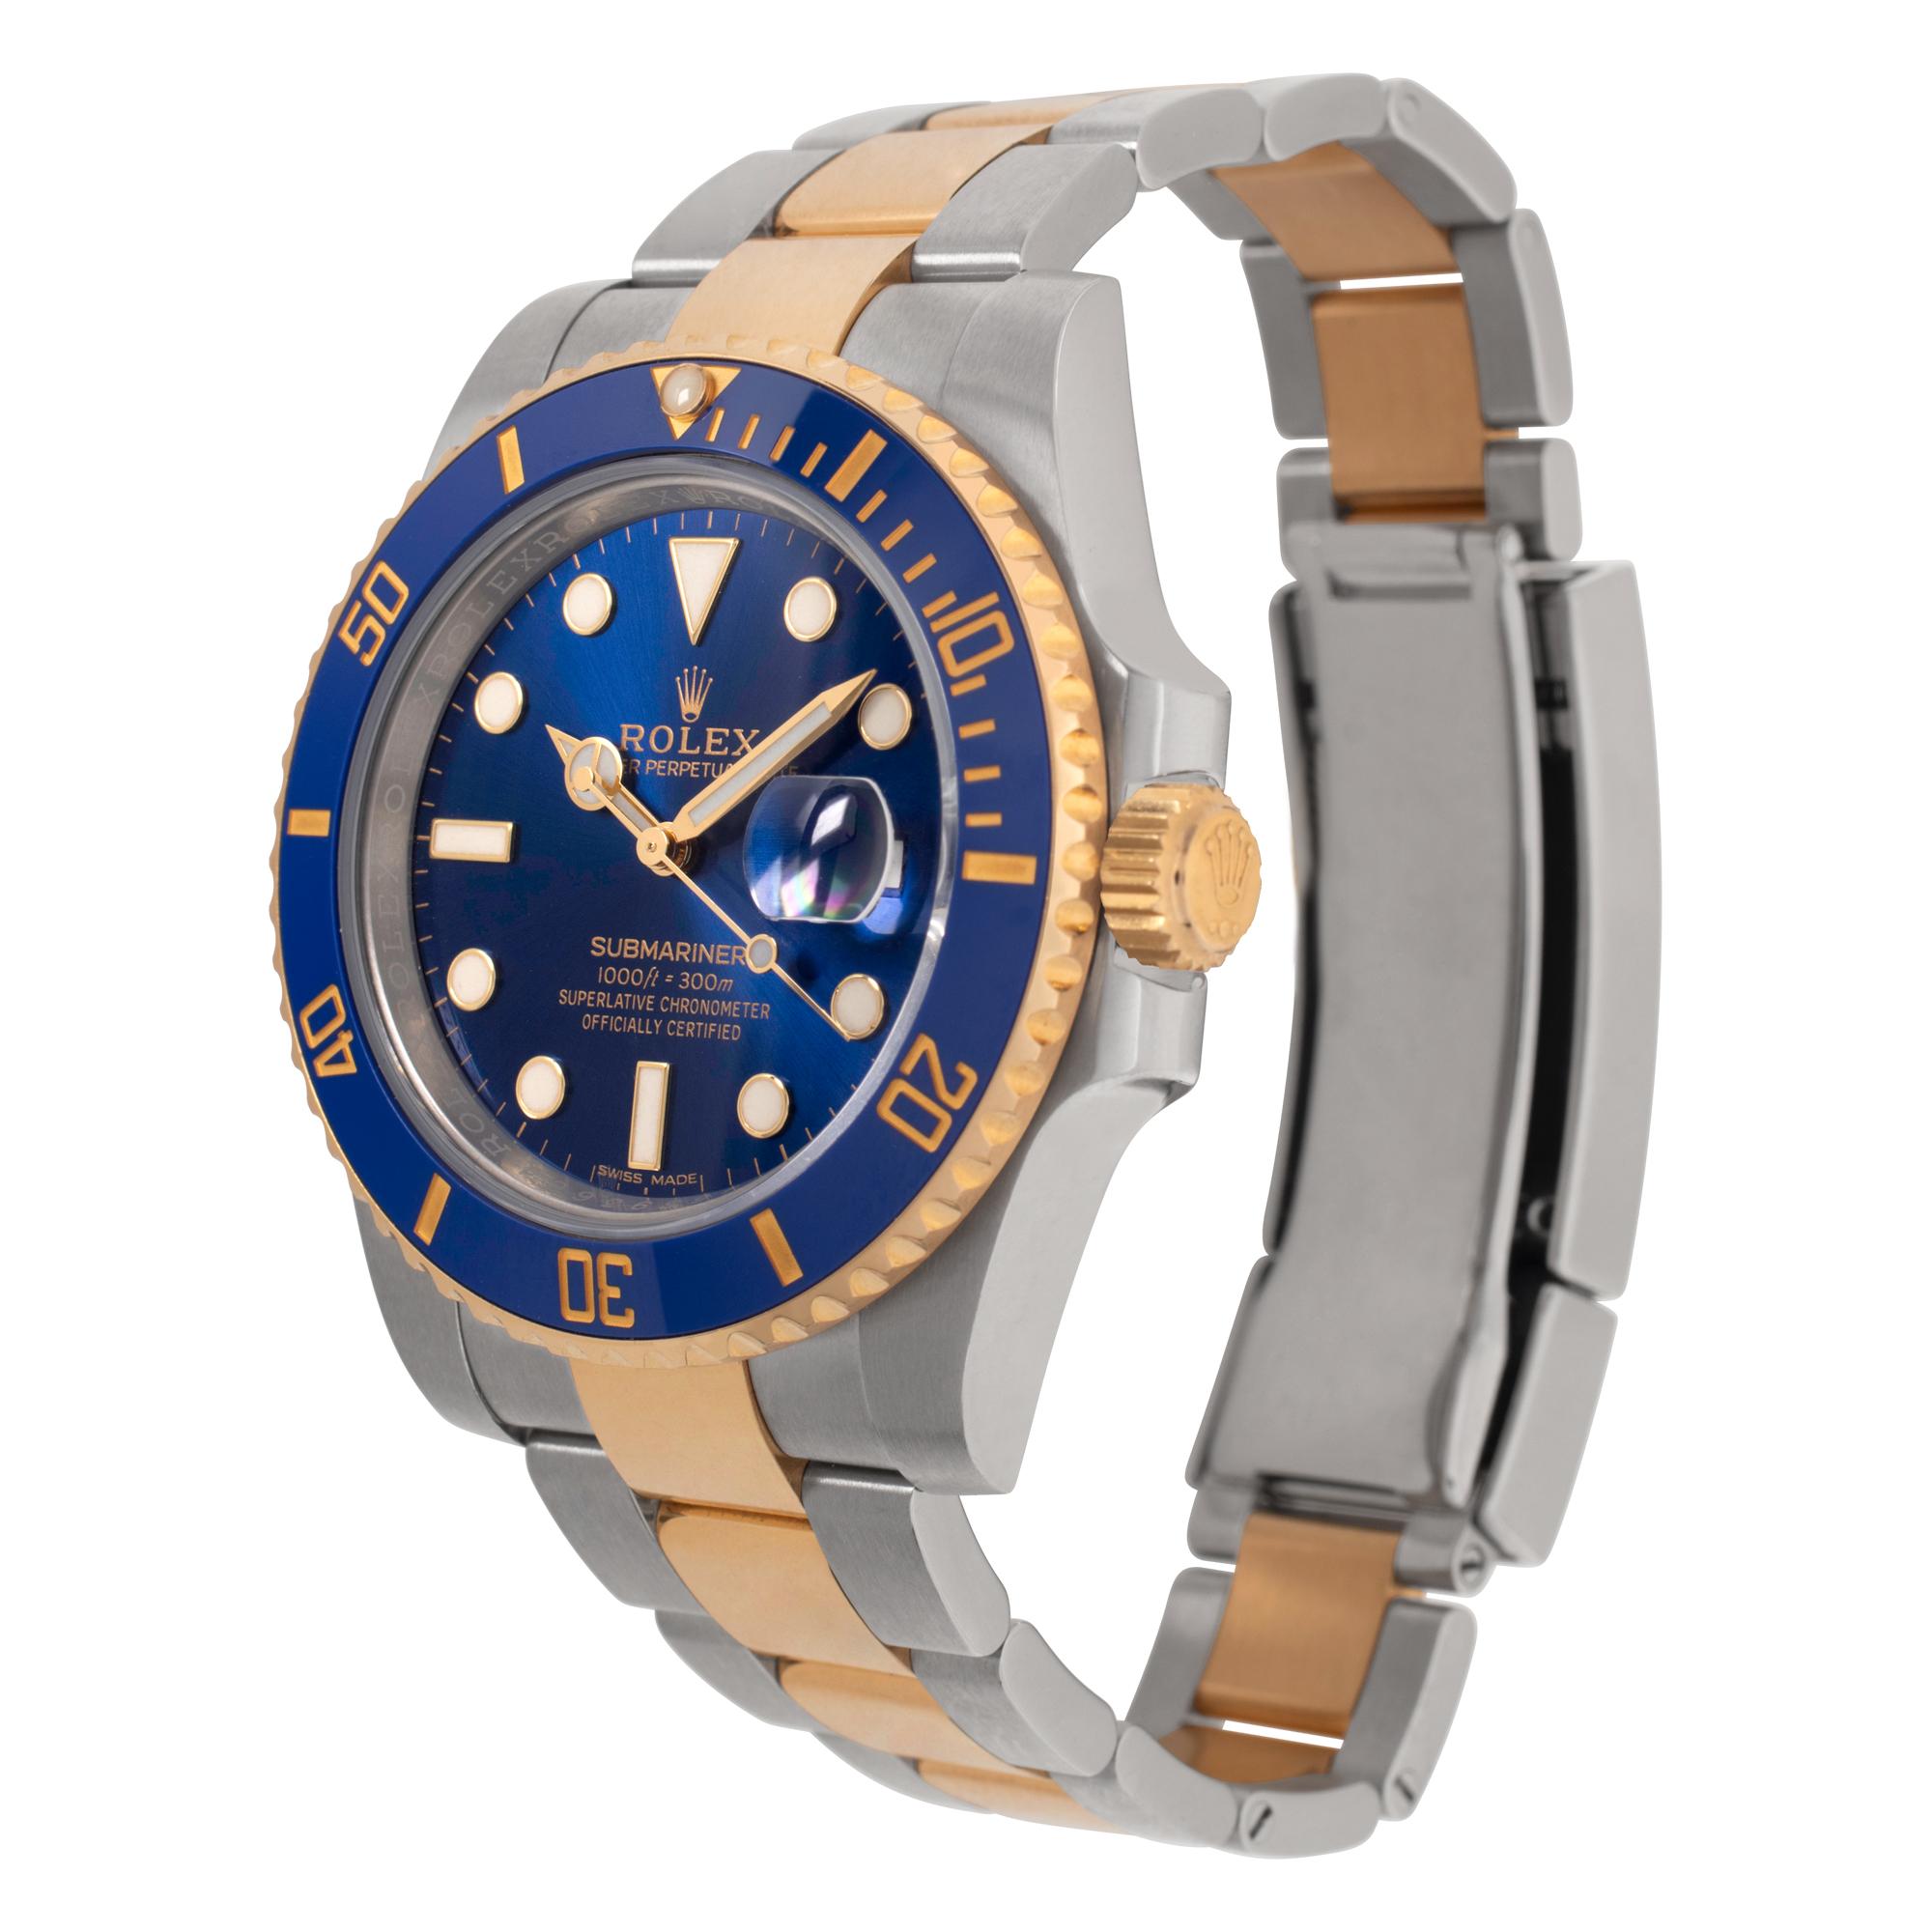 Rolex Submariner in 18k yellow gold & stainless steel. Auto w/ sweep seconds and date. 40 mm case size. **Bank wire only at this price** Ref 116613. Circa 2010s. Fine Pre-owned Rolex Watch. Certified preowned Sport Rolex Submariner 116613 watch is